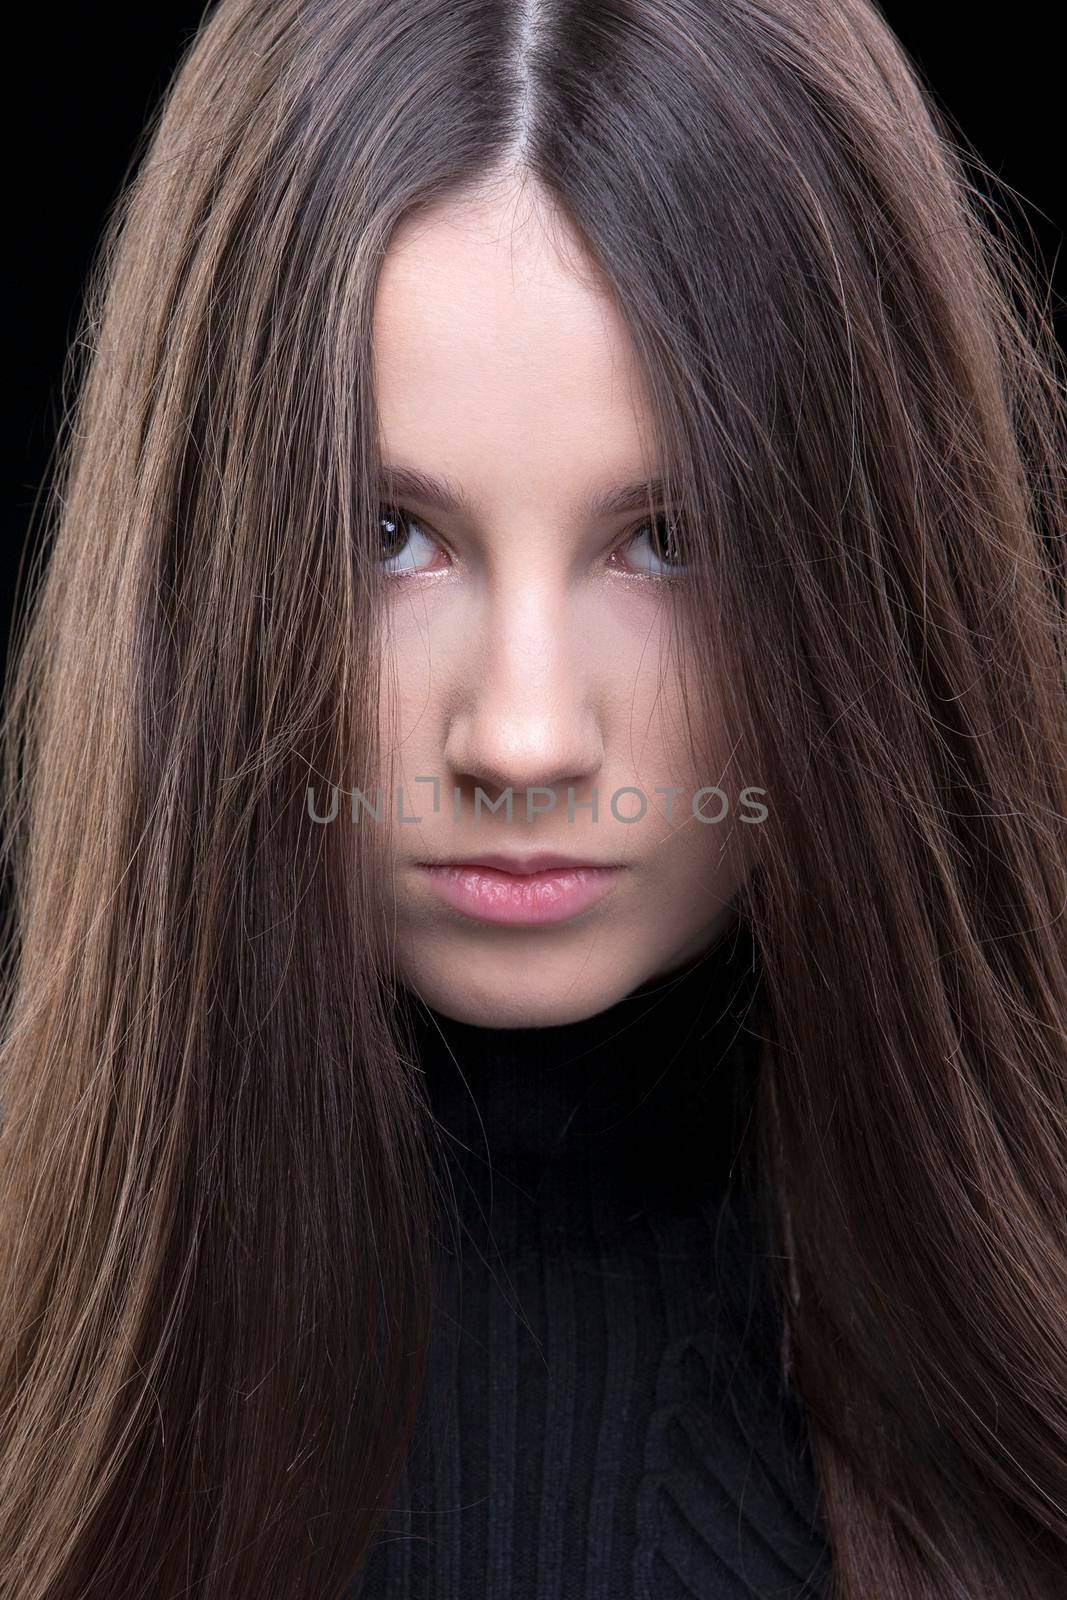 A beautiful brunette girl looks angrily into the camera.